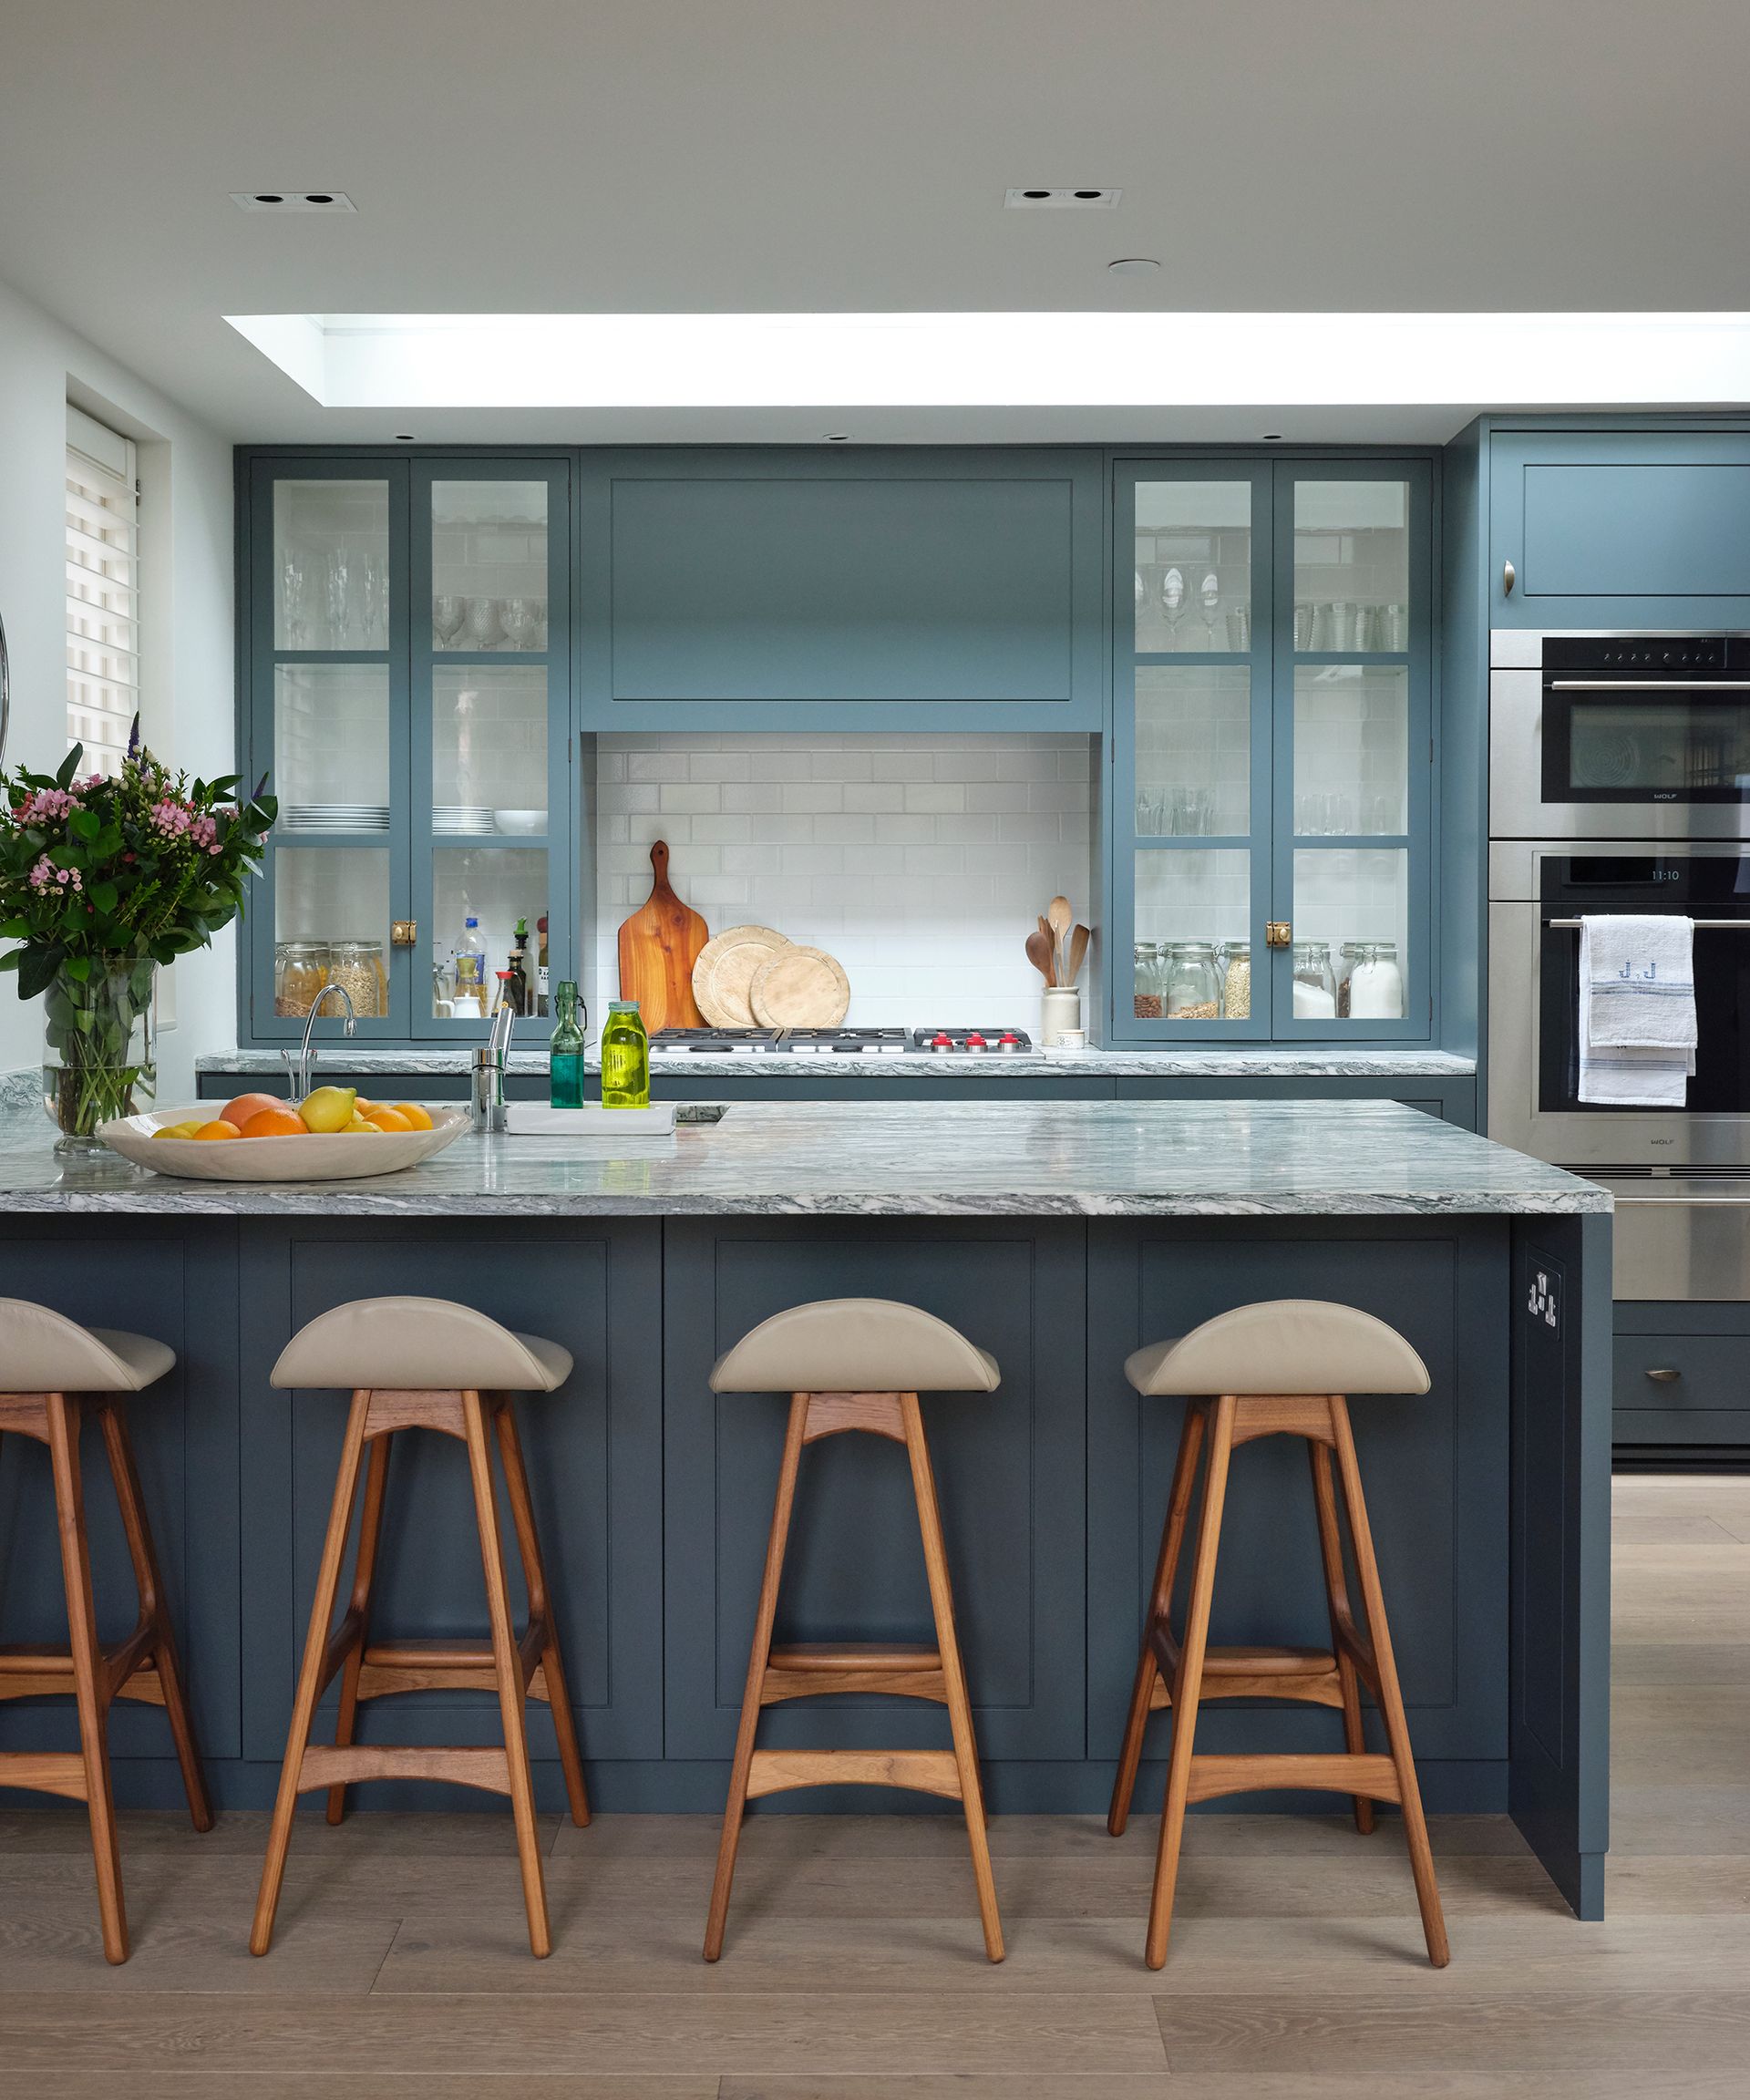 How much does a new kitchen cost? Homes & Gardens